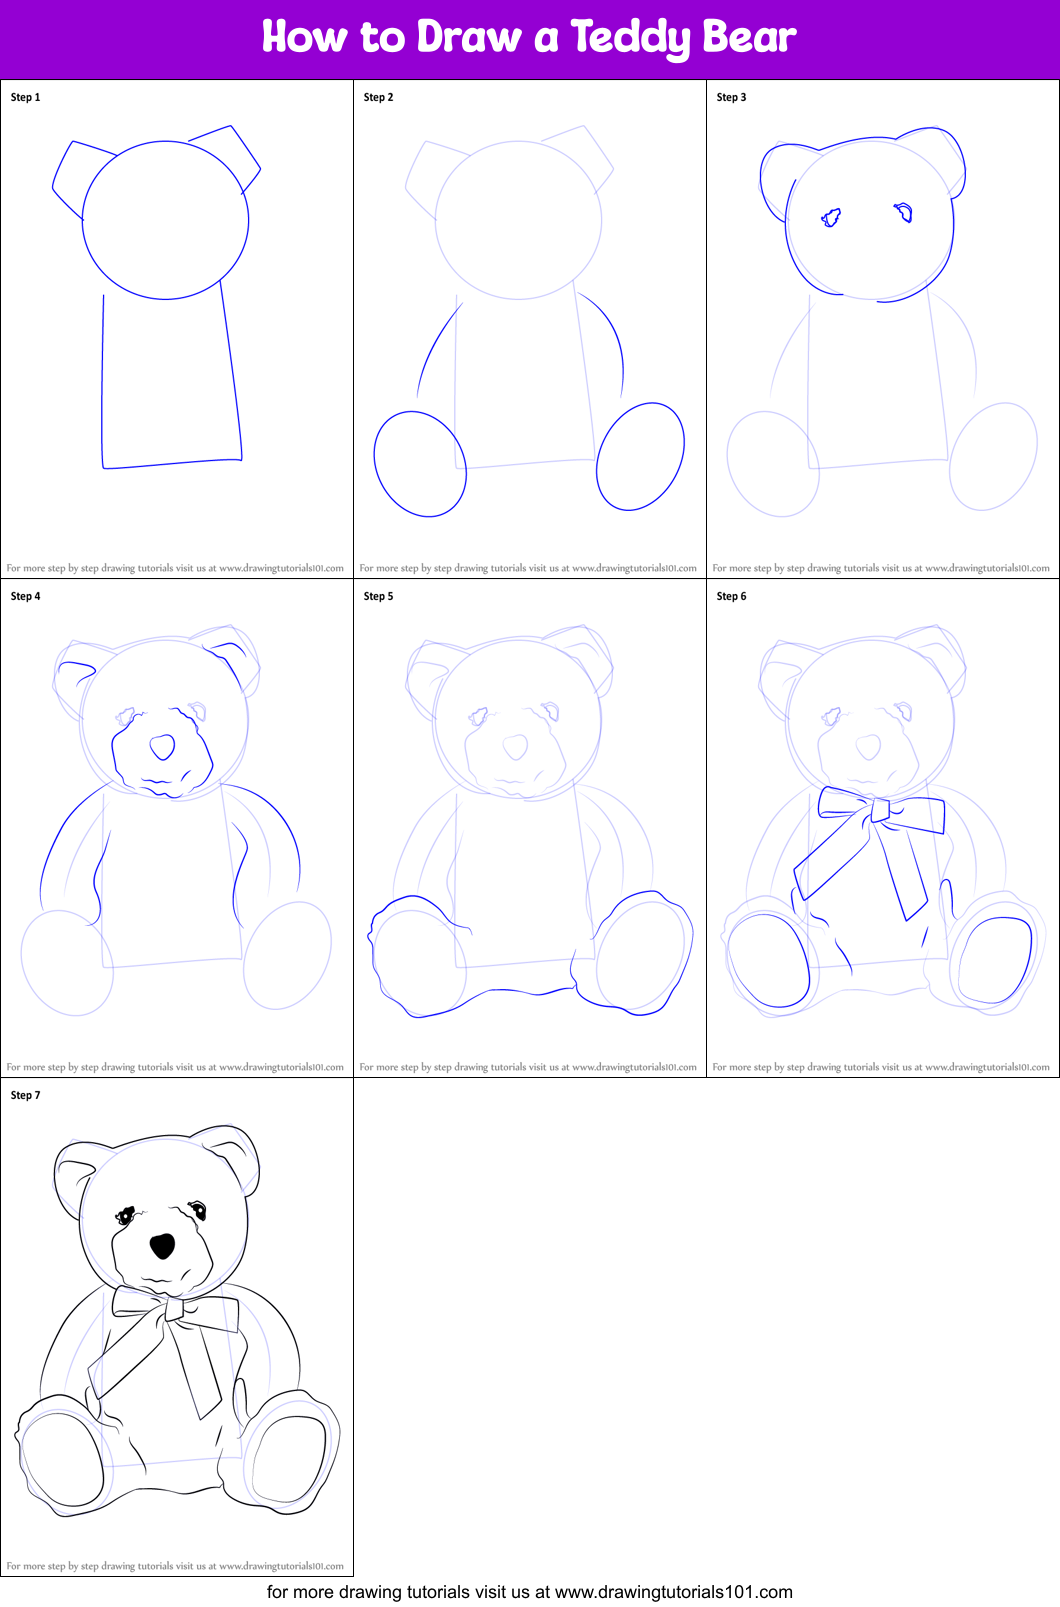 How to Draw a Teddy Bear printable step by step drawing